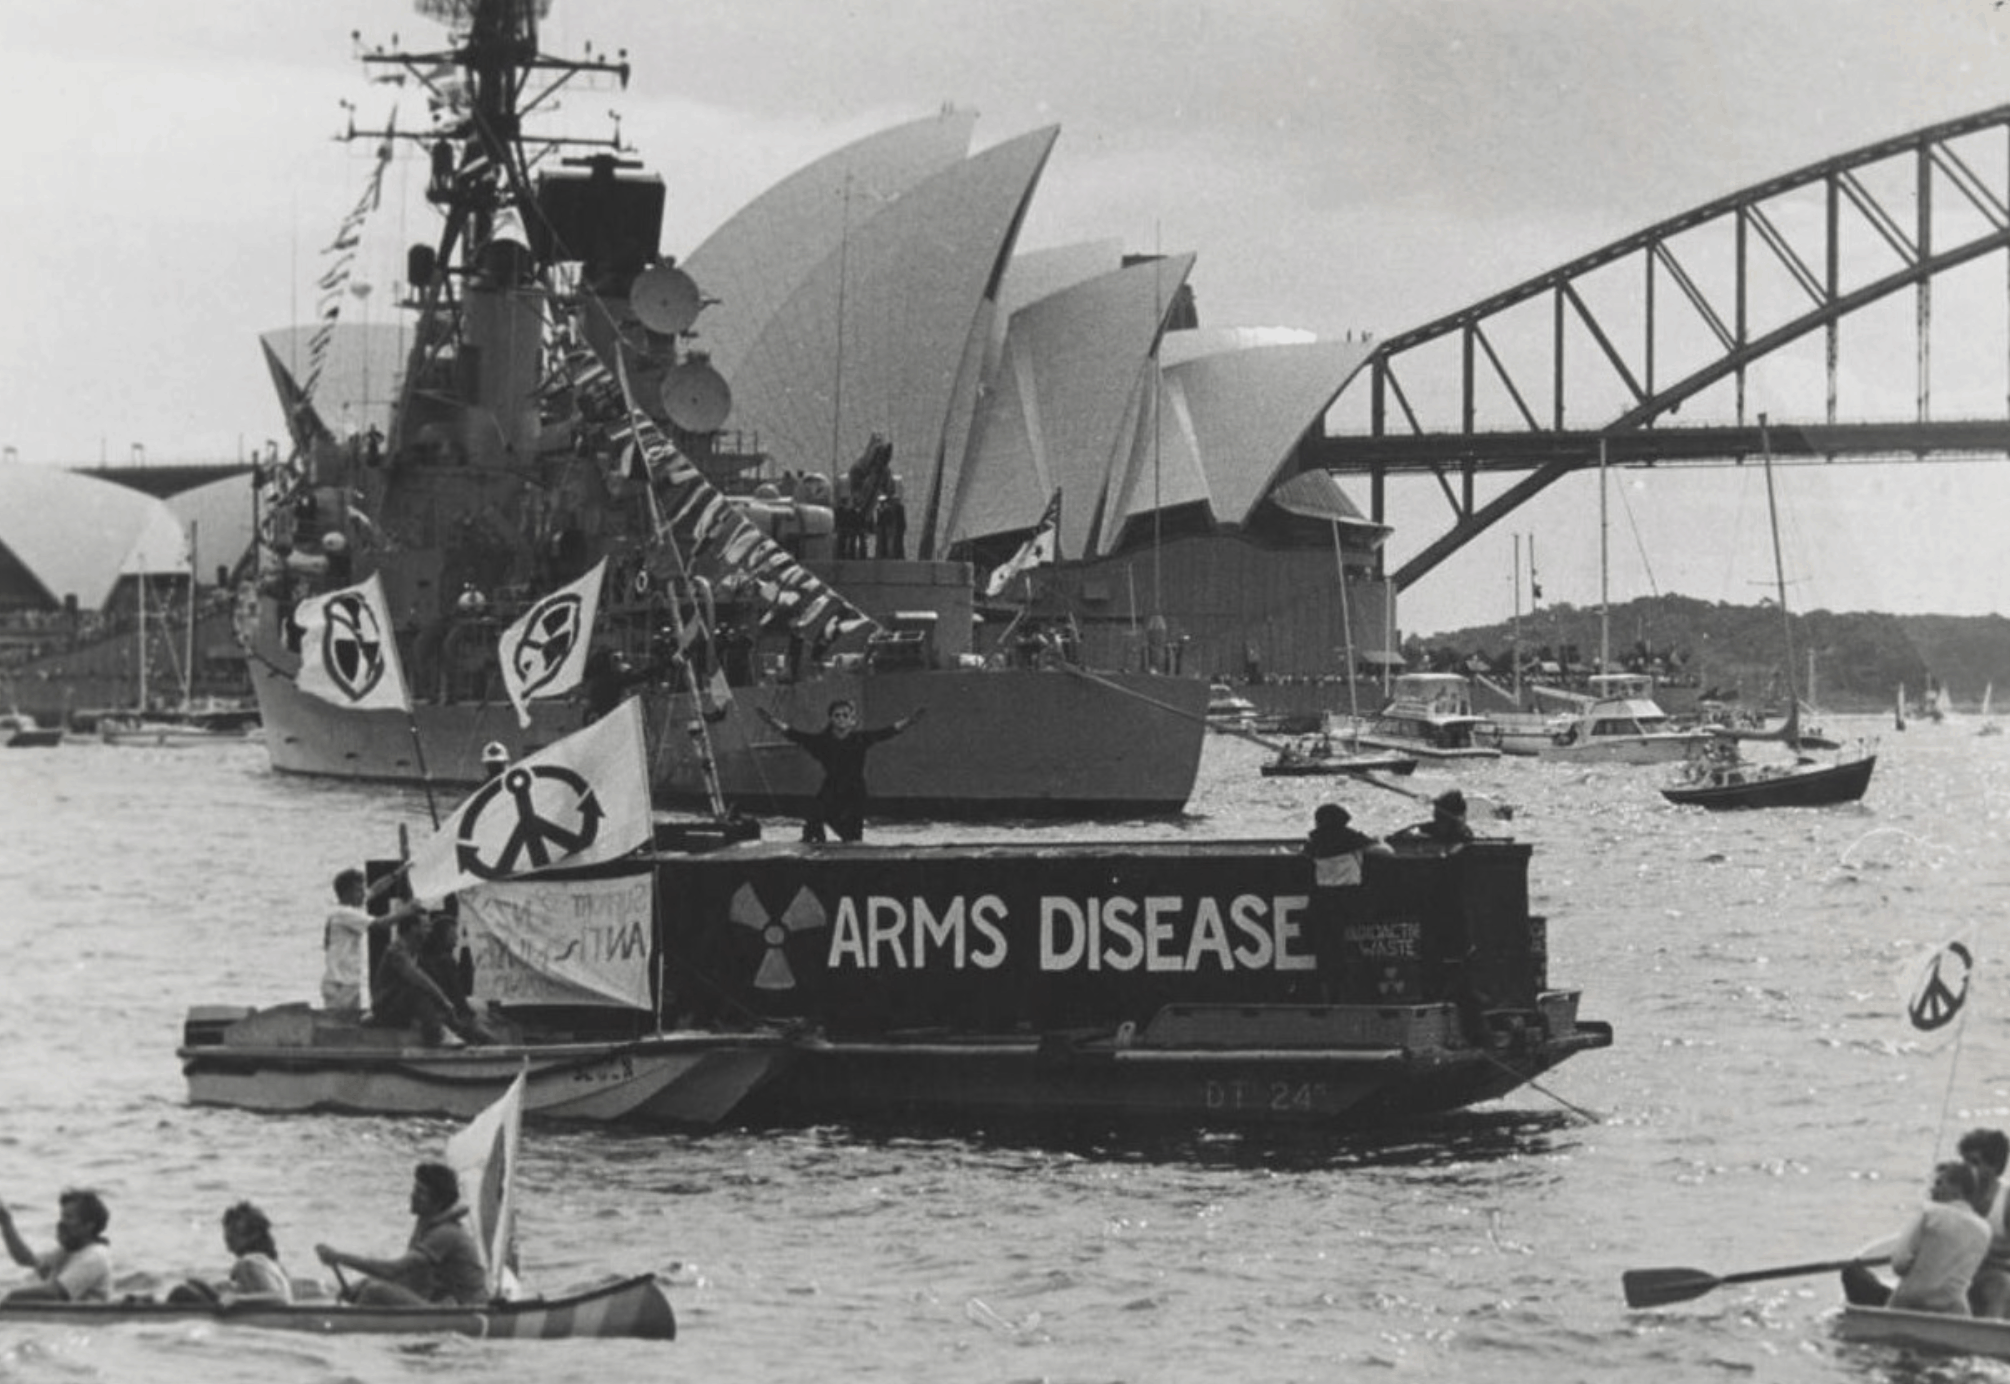 A protest boat in front of the Sydney Opera House and Harbour Bridge with a peace symbol flag and on the side of the boat it is written - Arms Disease.